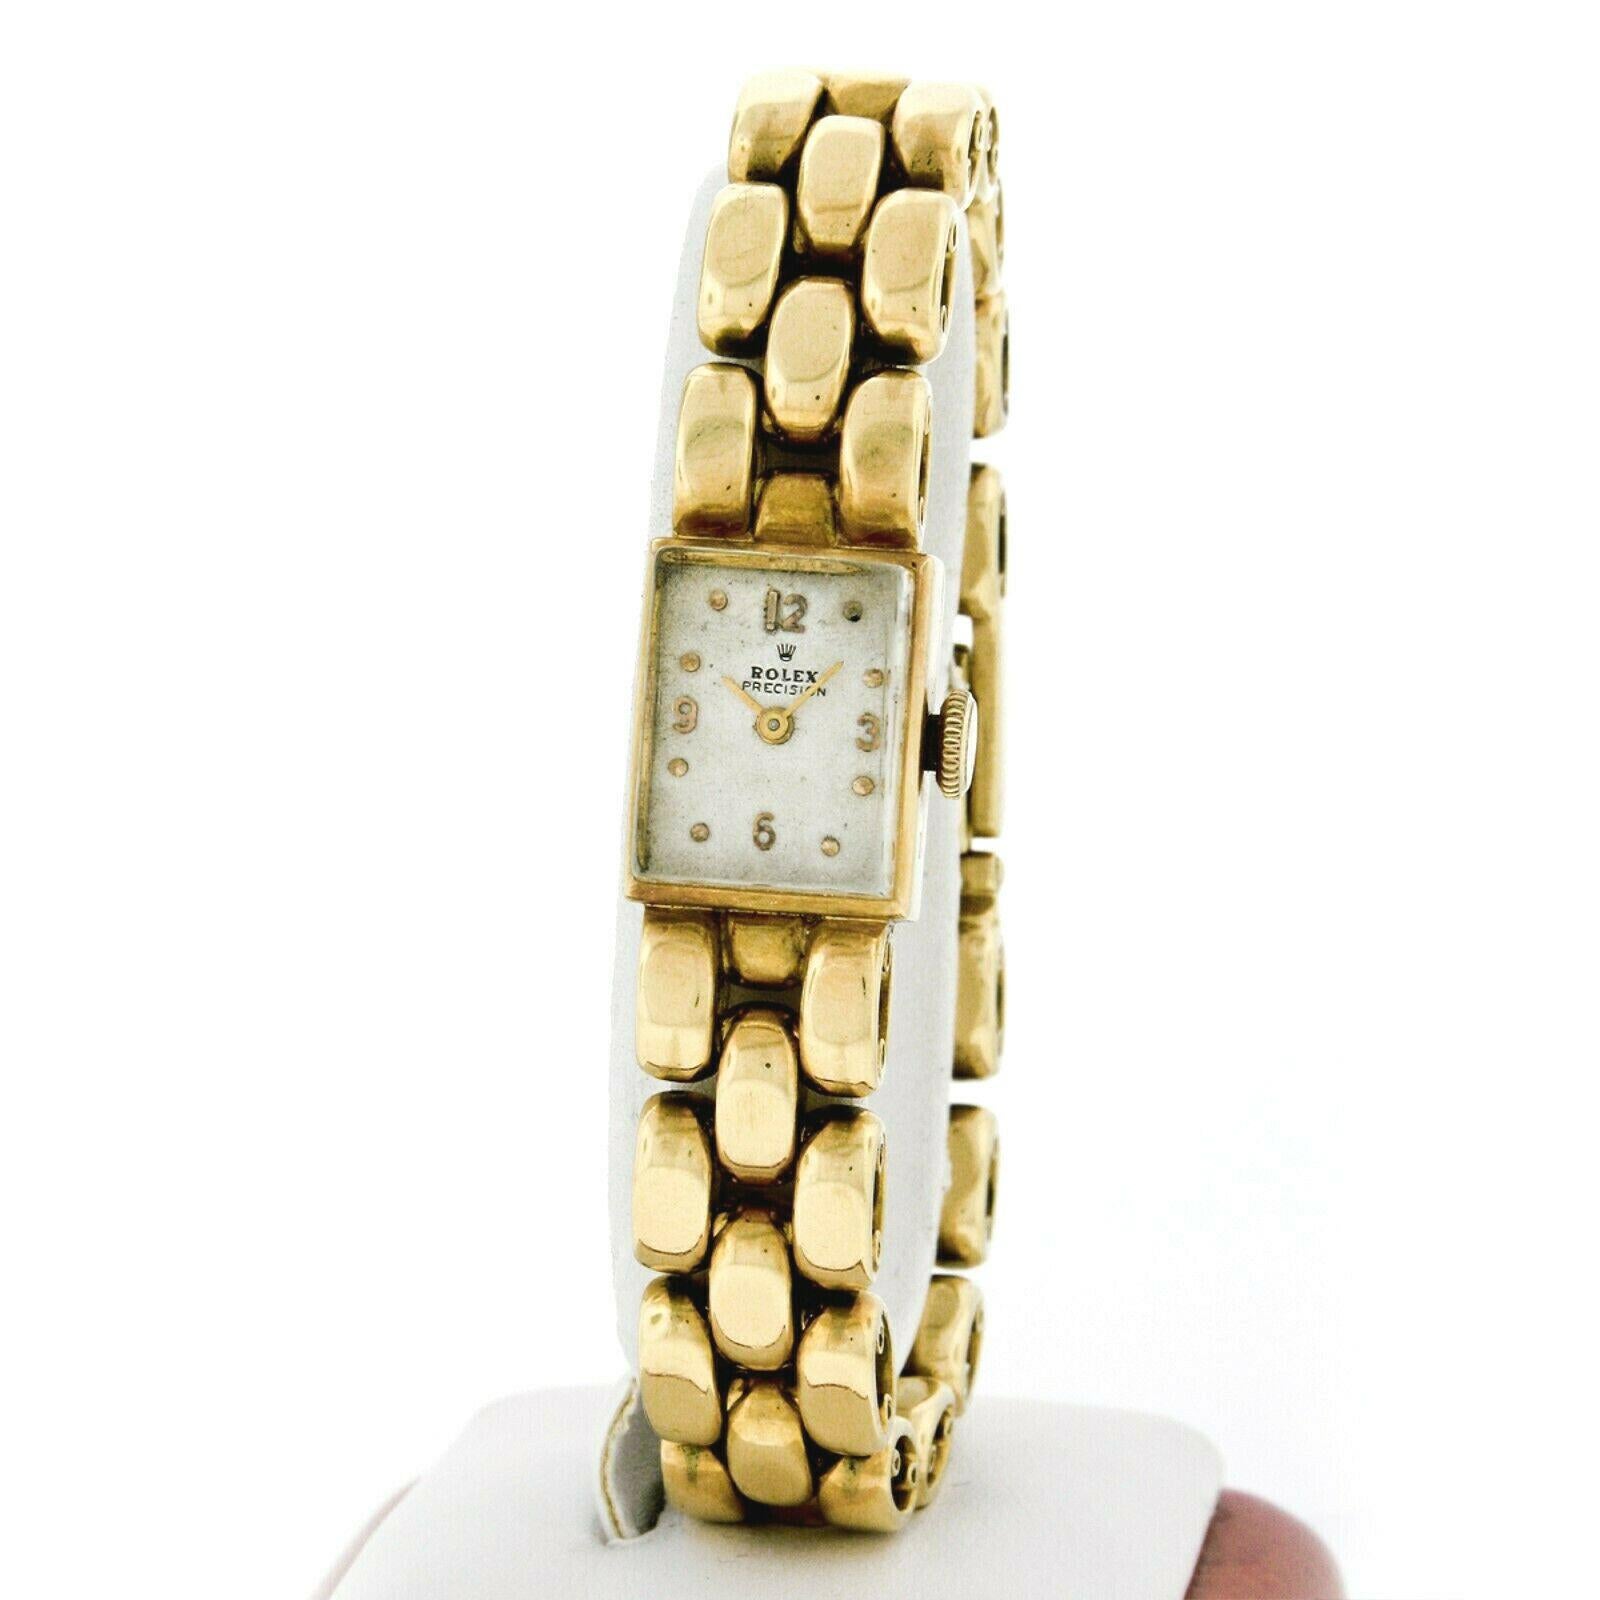 Here we have a gorgeous vintage ladies' Rolex wrist watch/bracelet. The watch case and bracelet are 100% original to the piece and are well crafted in solid 18k yellow gold. The mechanical, 17 jewel, hand-wound movement keeps perfect time and the